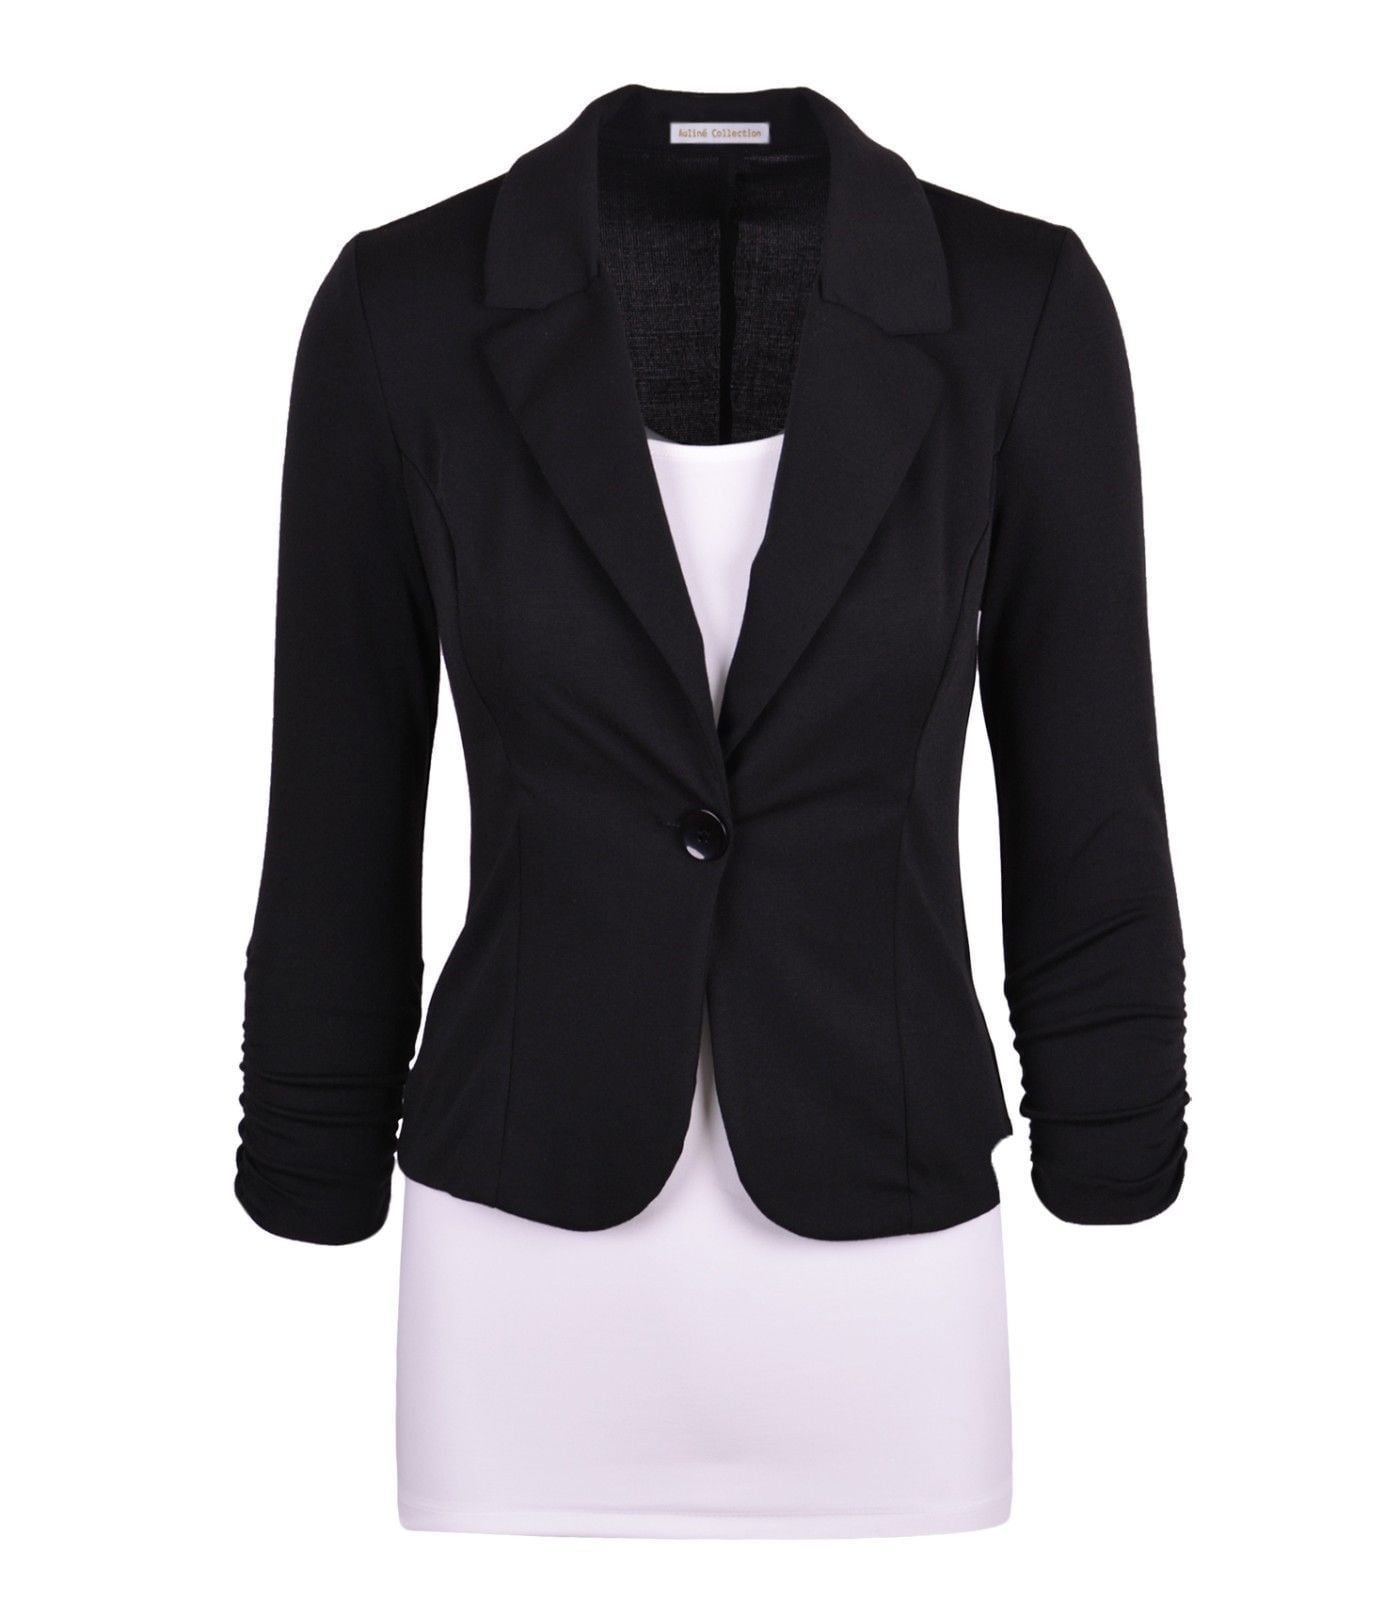 Buy LookbookStore Blazers for Women Suit Jackets Dressy 3/4 Sleeve Blazer  Business Casual Outfits for Work, Navy Blue, Small at Amazon.in